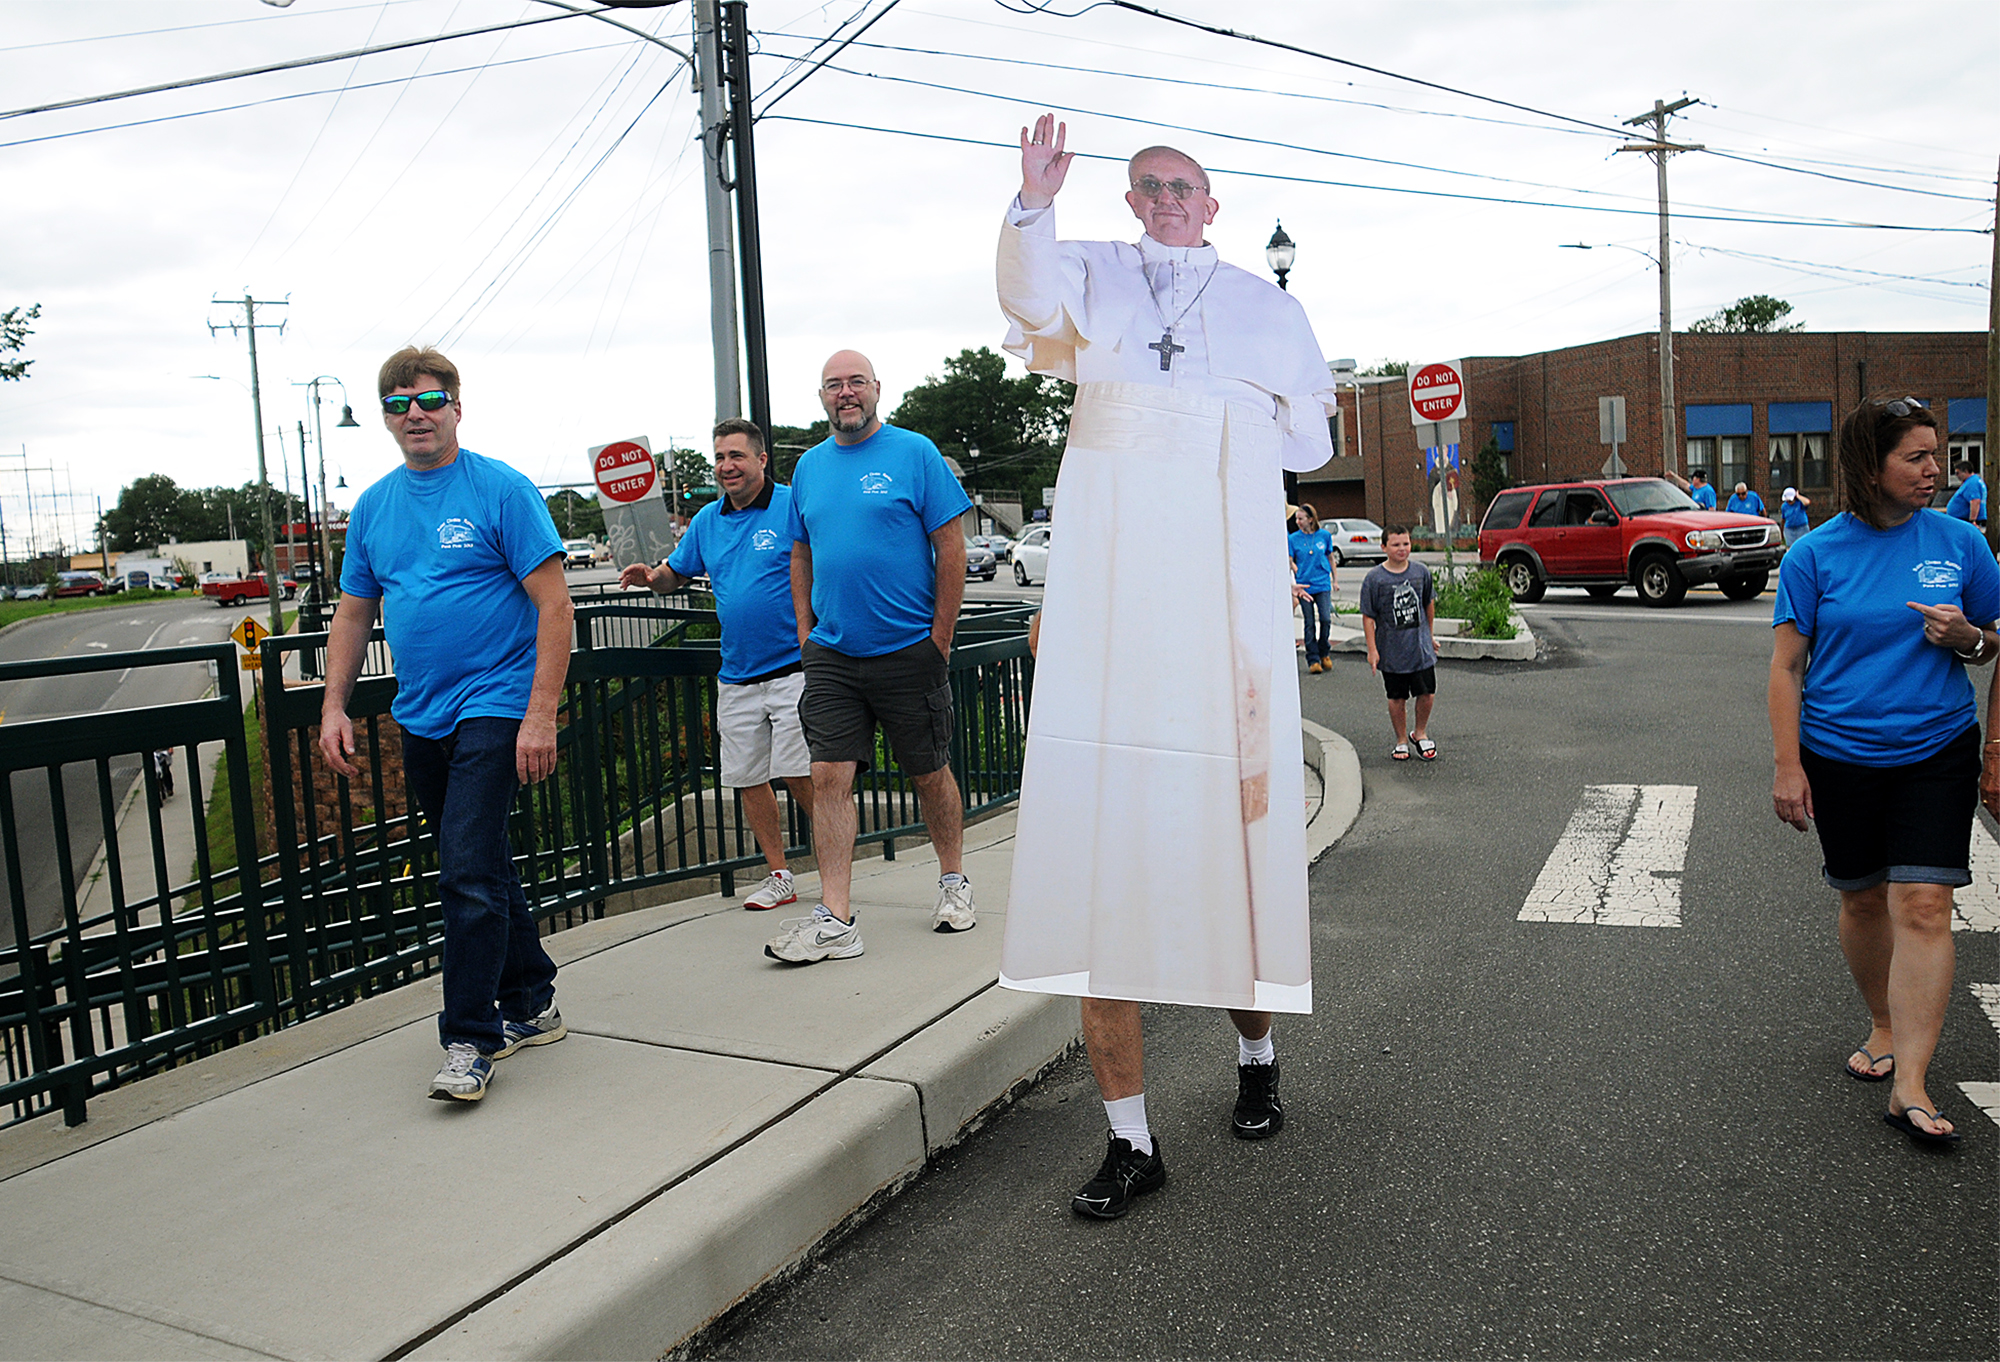  Parishioners from St. Thomas Aquinas Church in Croydon walk with fellow parishioner Tony Cinkutis, 75, as he carries a cardboard cutout of Pope Francis to the train station across the street from their church on Sunday, June 28, 2015. The Croydon tr